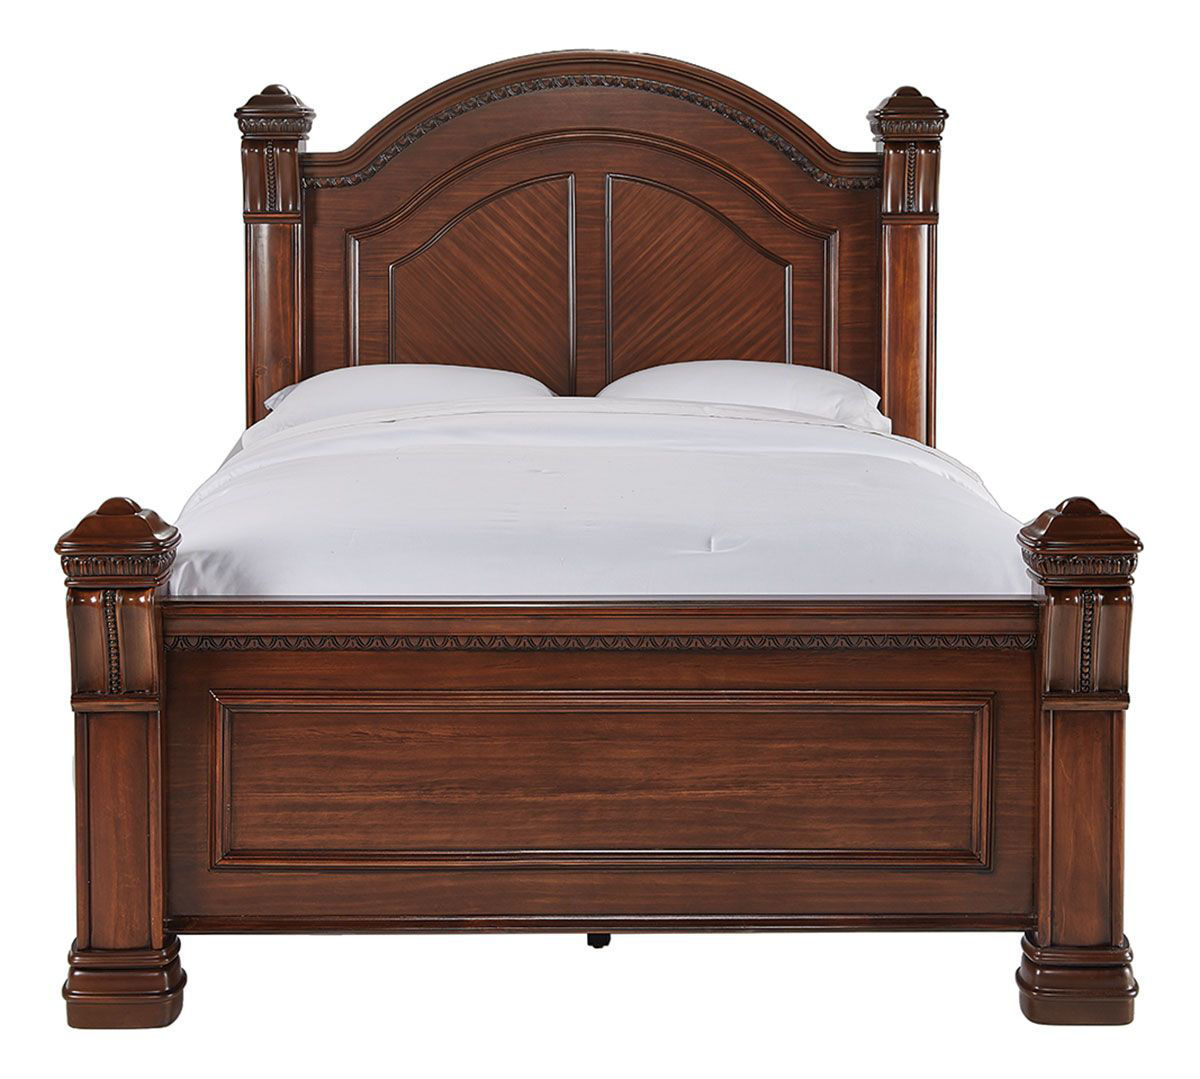 Belmont Complete King Bed Bad, Cherry King Headboard And Frame Set